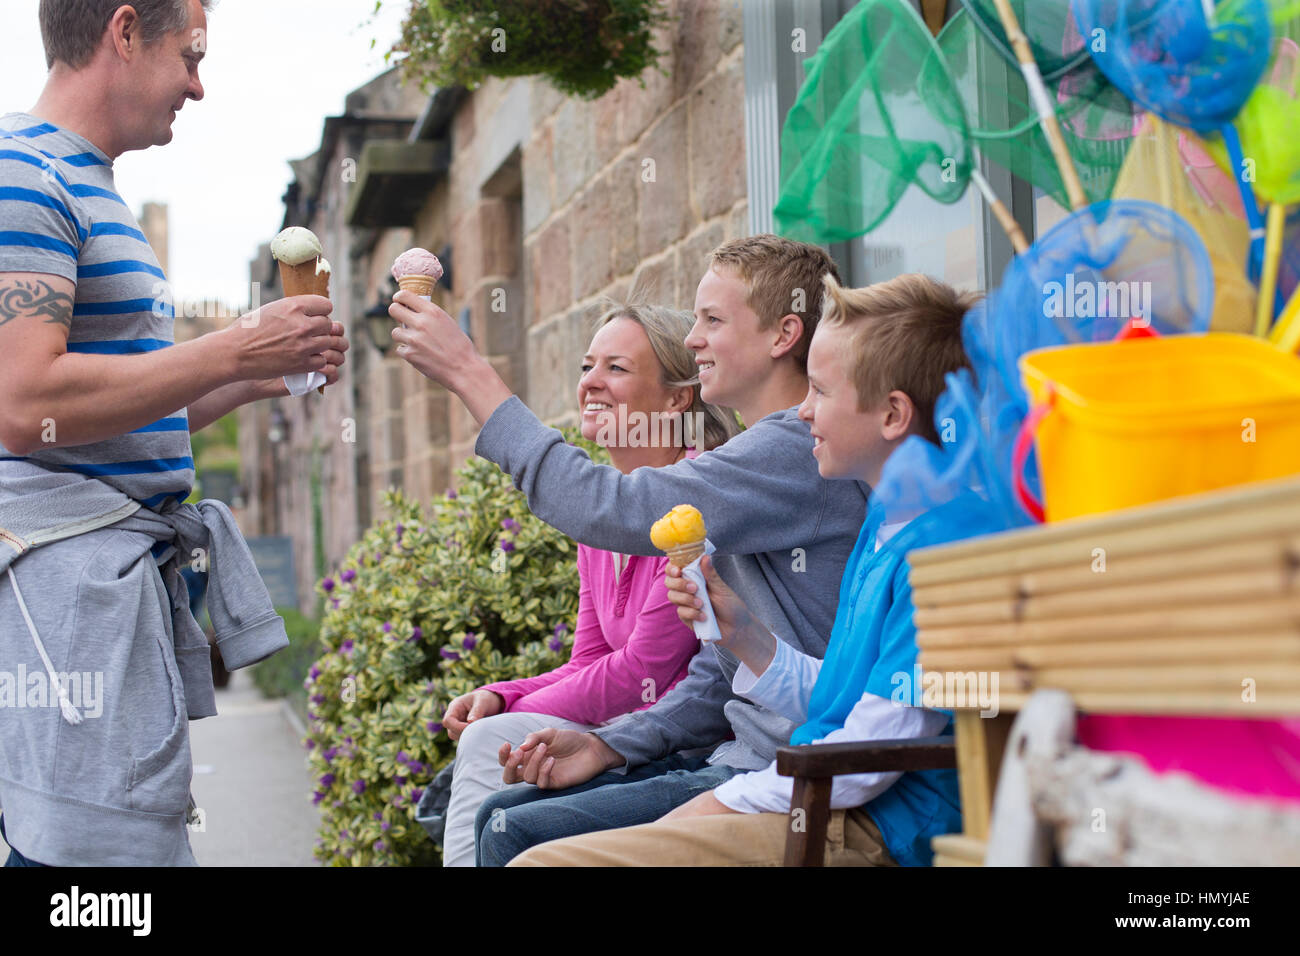 Family enjoying ice cream outside of a shop. They are all holding their cones and smiling. Stock Photo